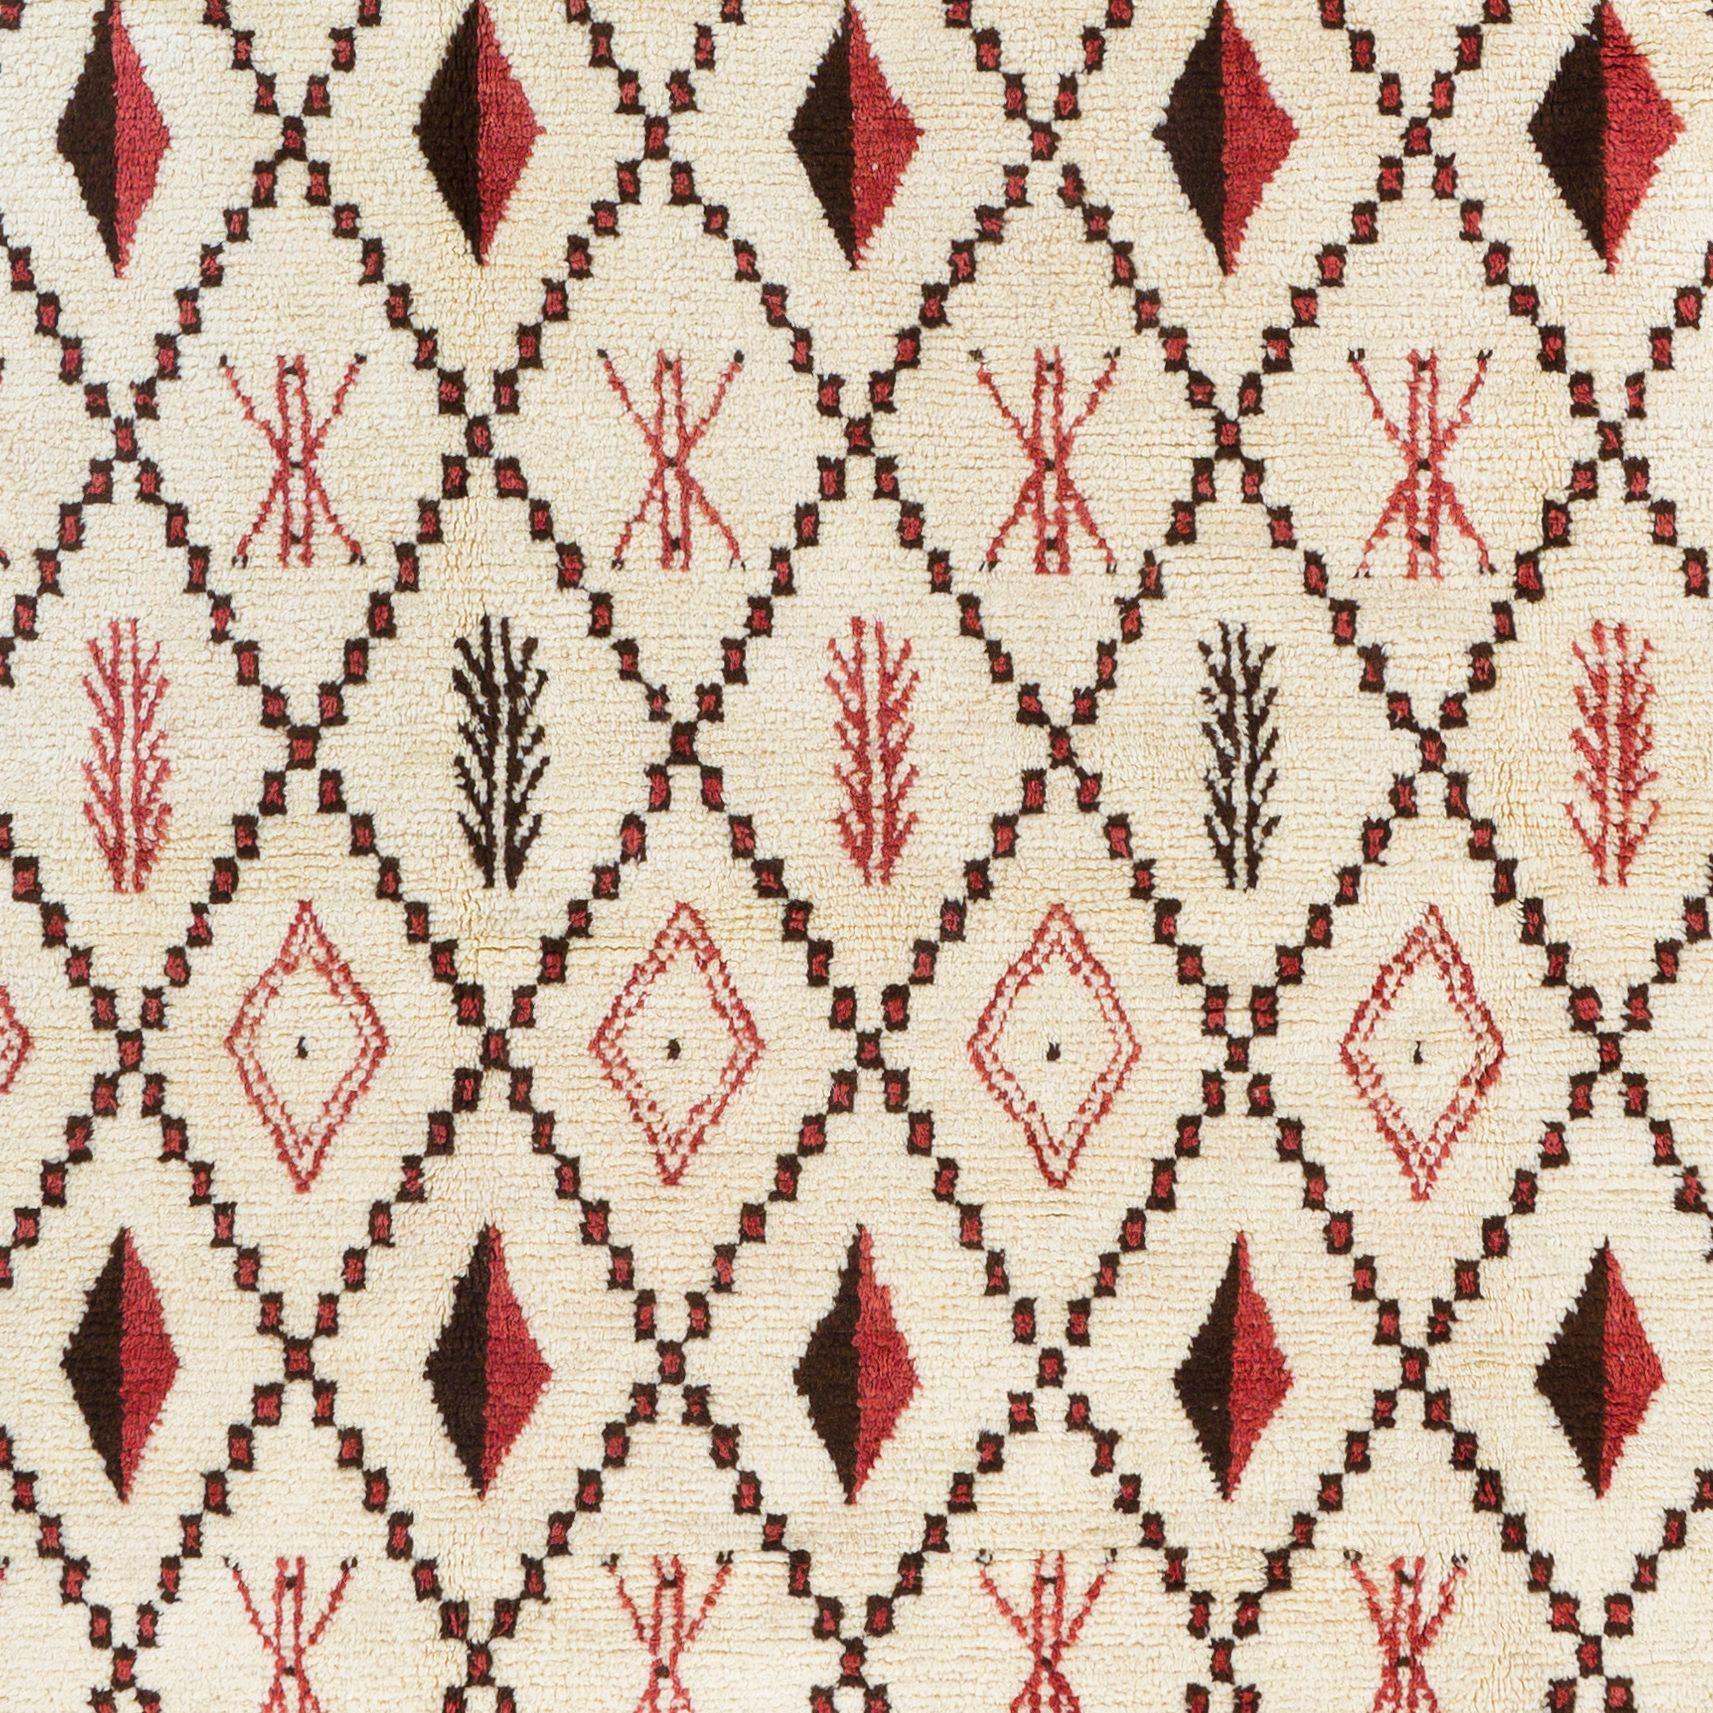 Contemporary 10.5x14.4 Ft Modern Moroccan Tulu Wool Rug in Beige, Red & Brown. Made-to-order For Sale